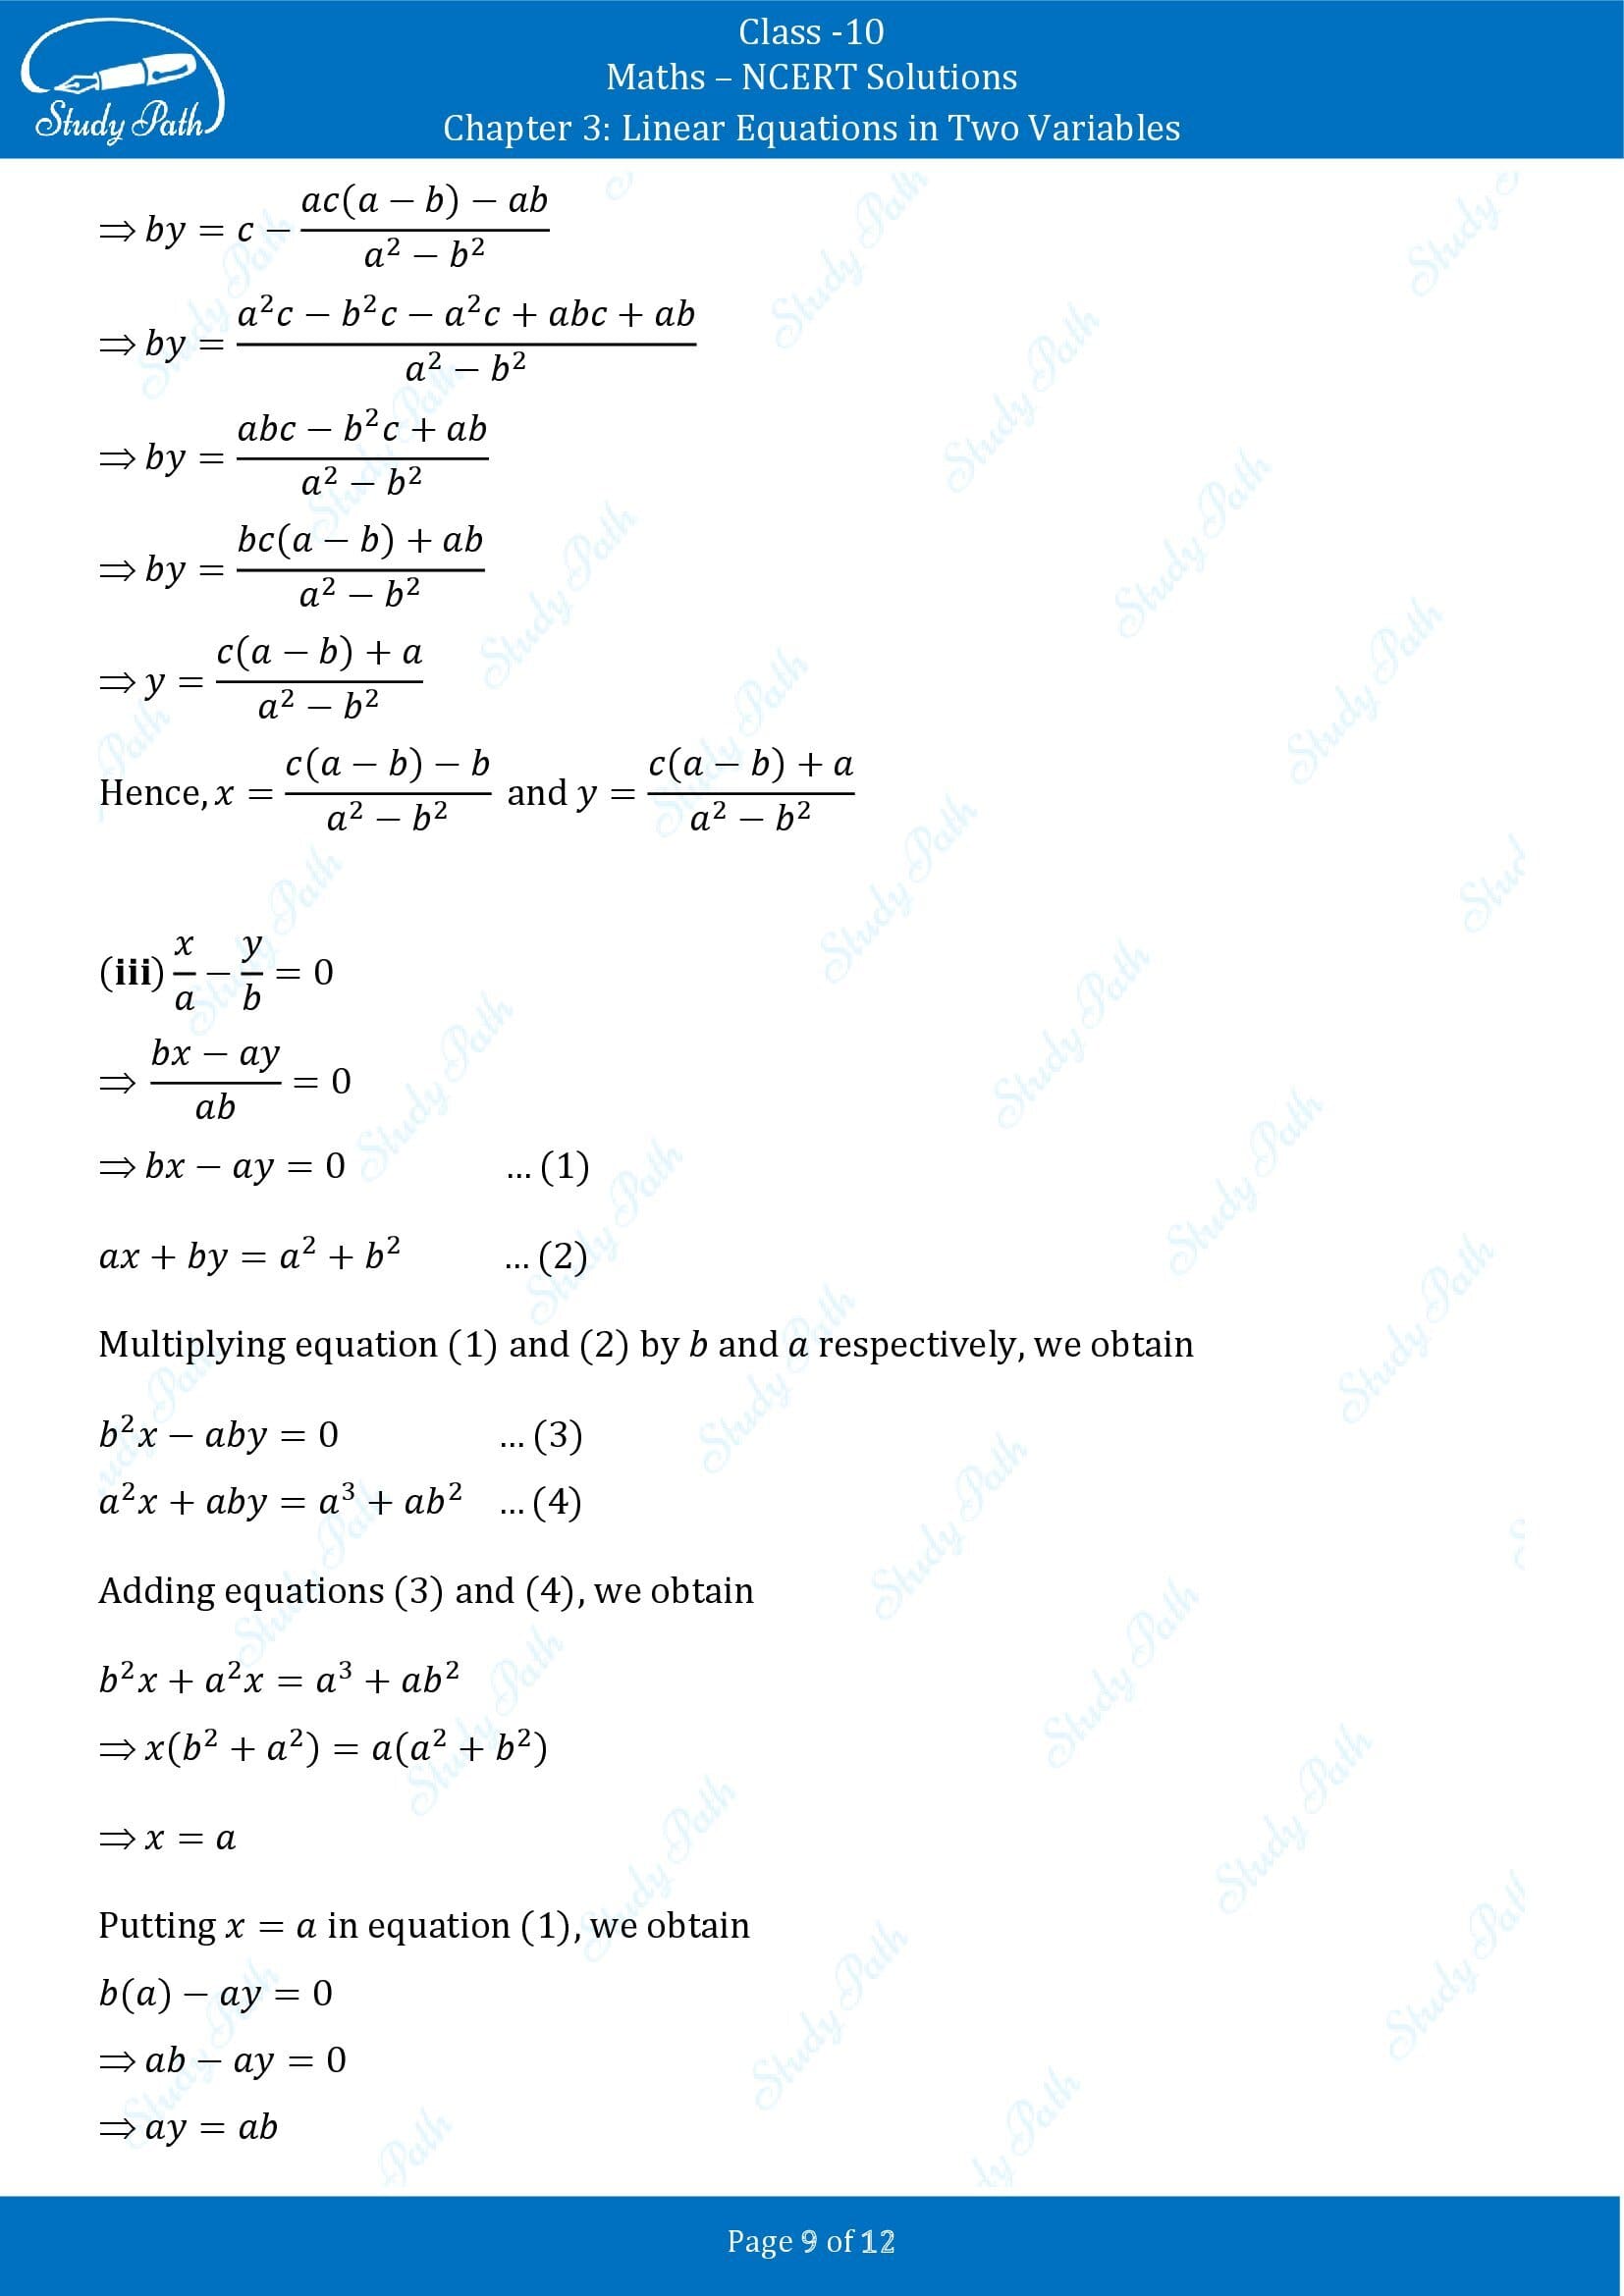 NCERT Solutions for Class 10 Maths Chapter 3 Linear Equations in Two Variables Exercise 3.7 00009